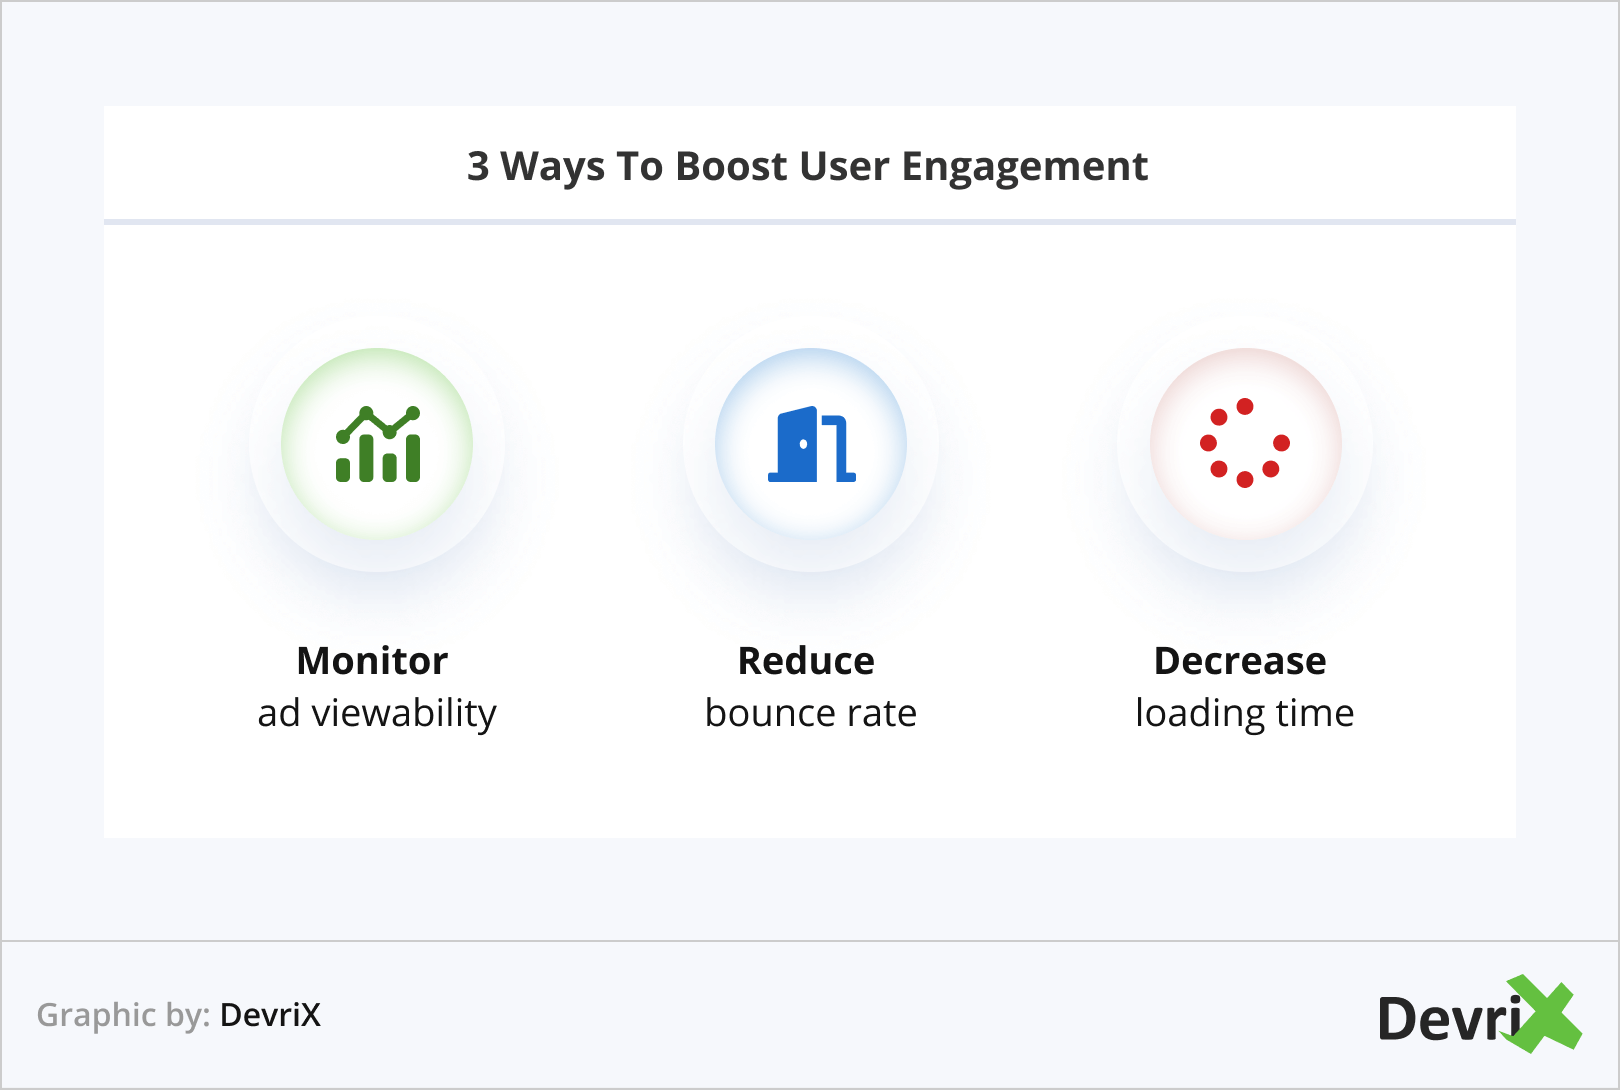 3 Ways To Boost User Engagement